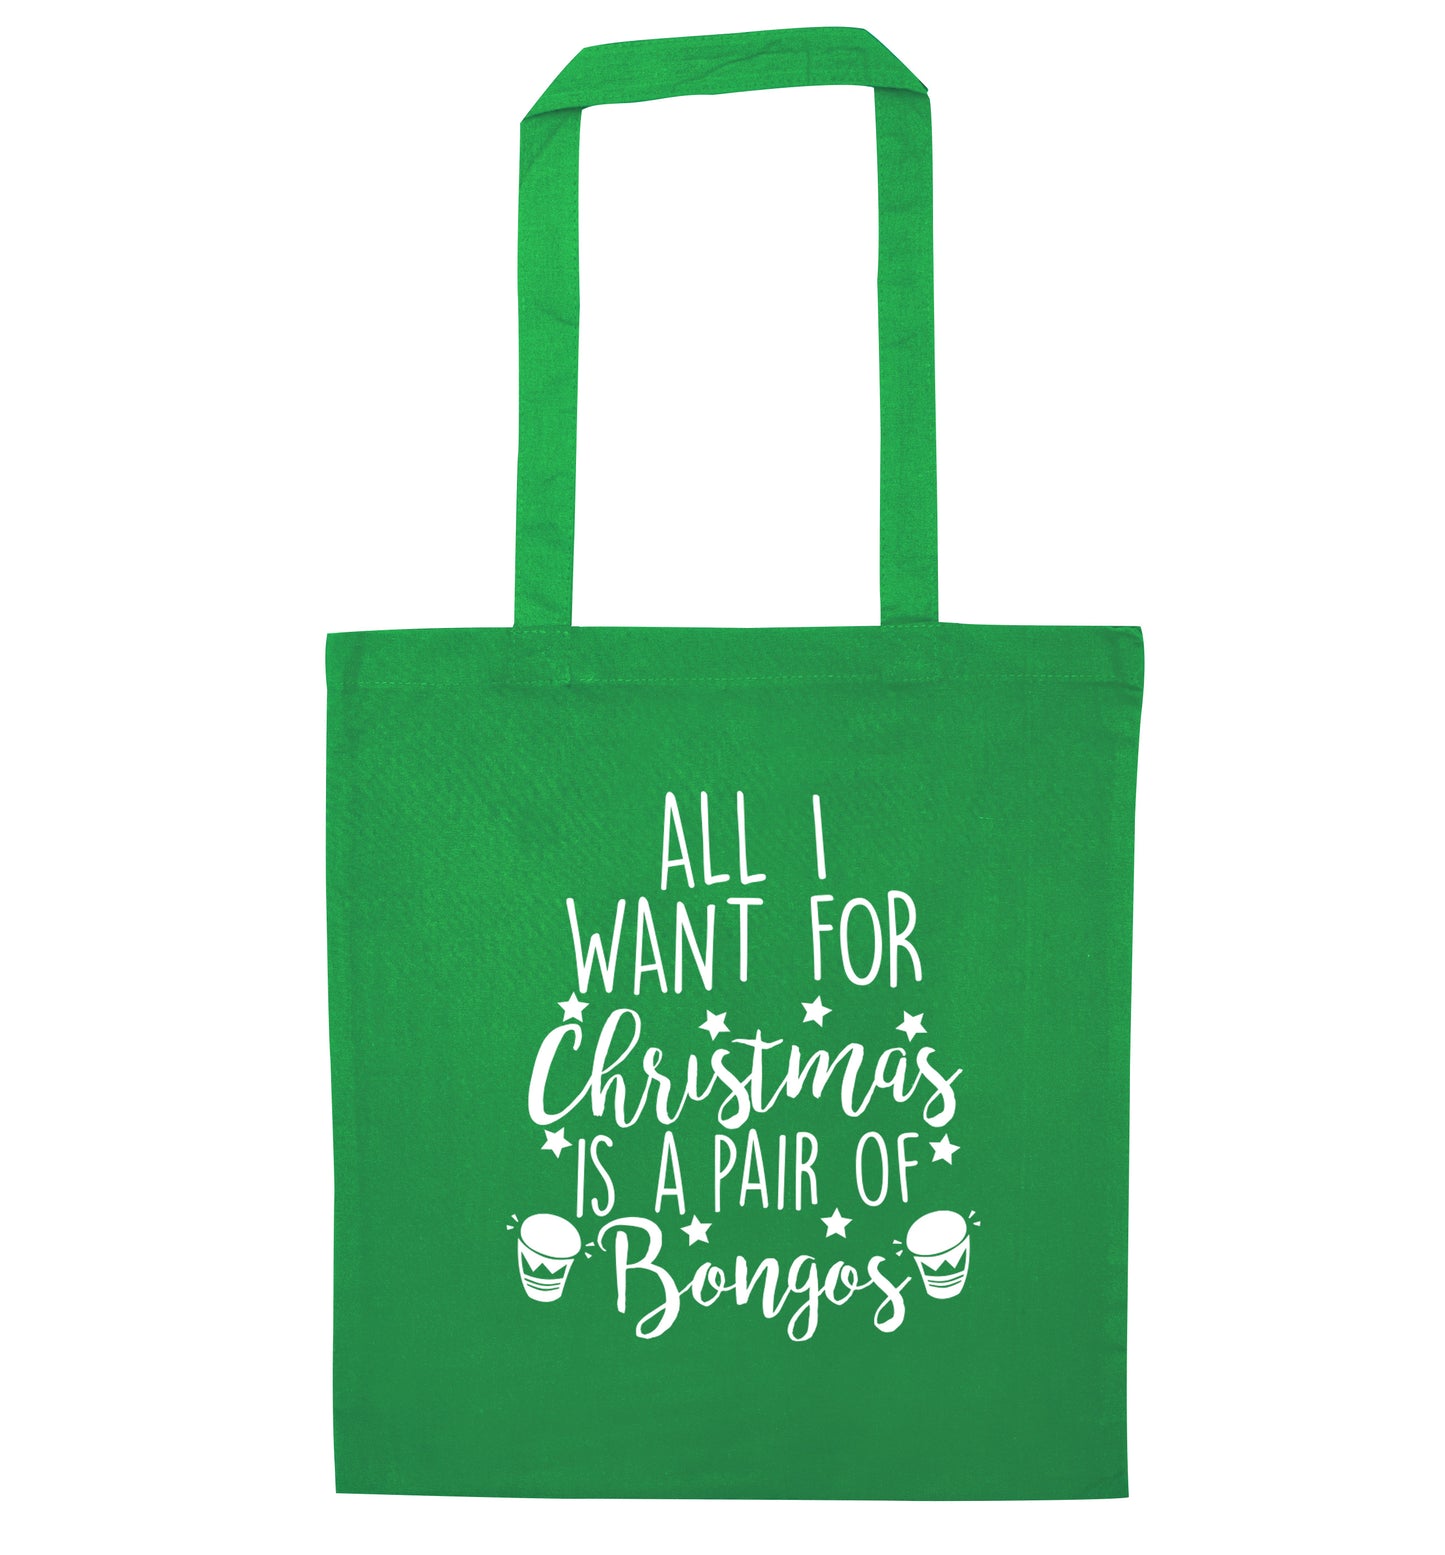 All I want for Christmas is a pair of bongos! green tote bag